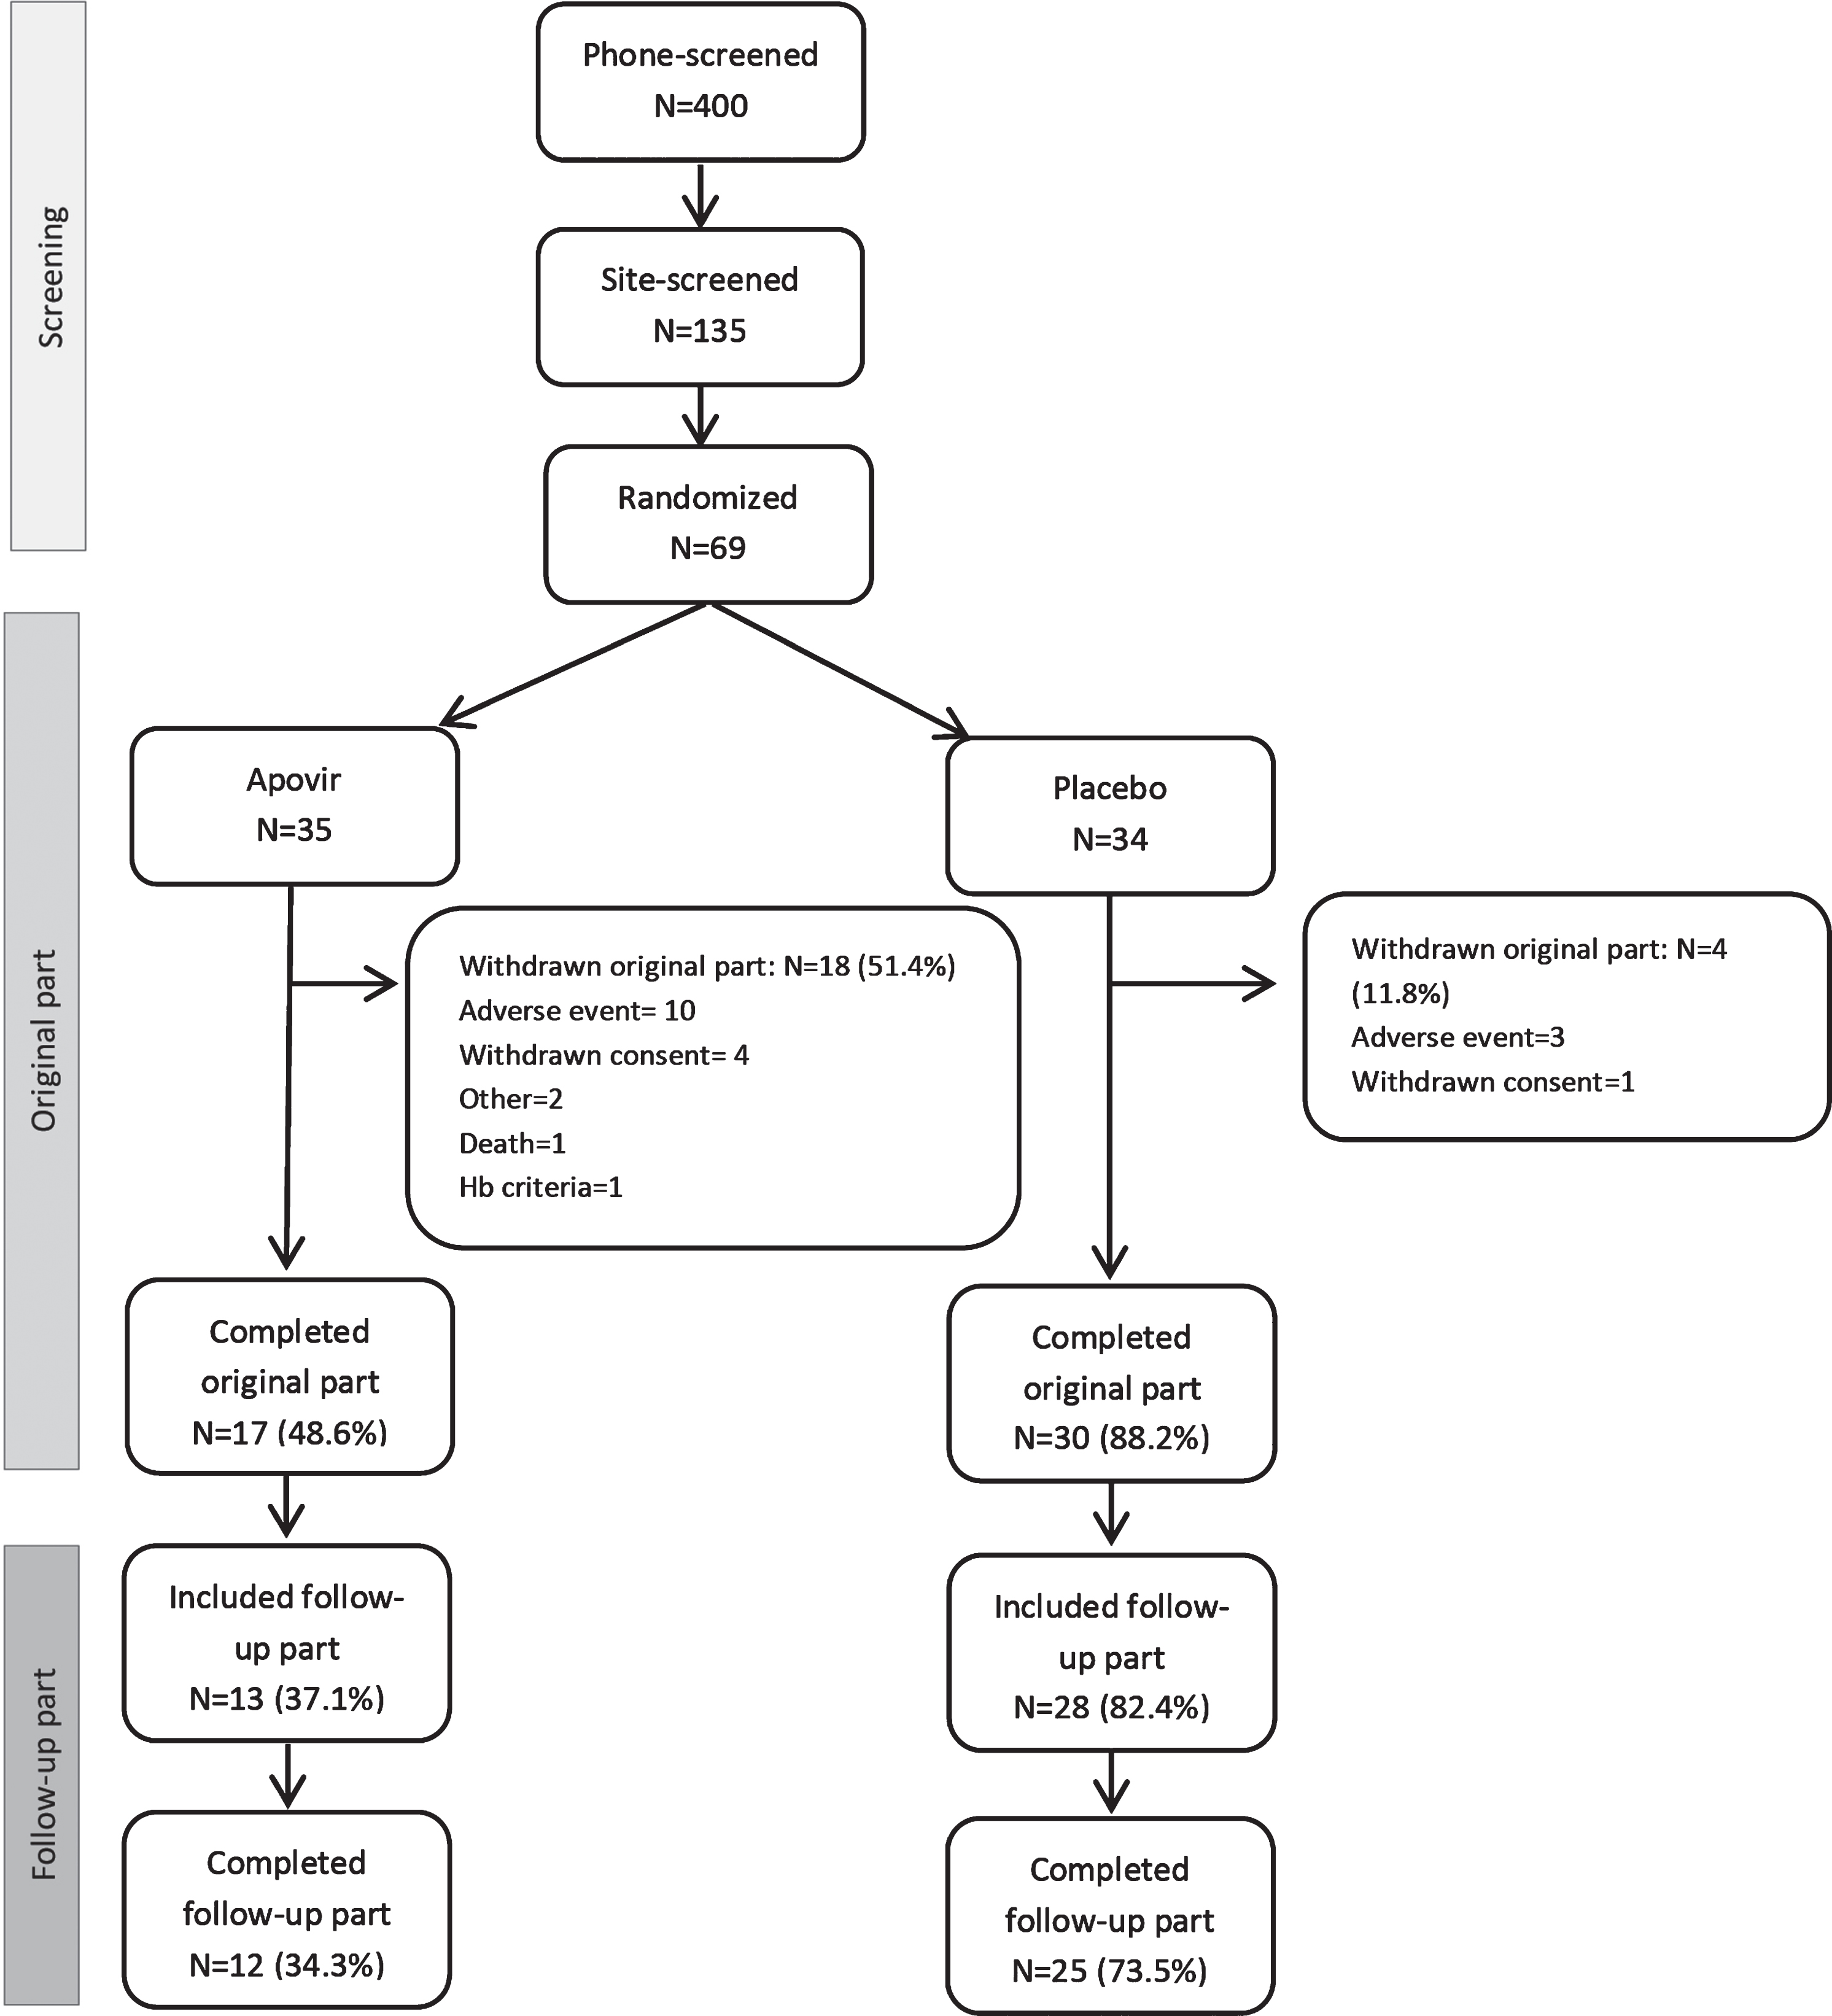 Disposition of patients and defined parts of the trial. The screening period comprised screening activities and visit up to randomization, the original part comprised the 9-month treatment period and 1-month follow-up visit, and the follow-up part comprise the 6- and 12-month follow-up visits.